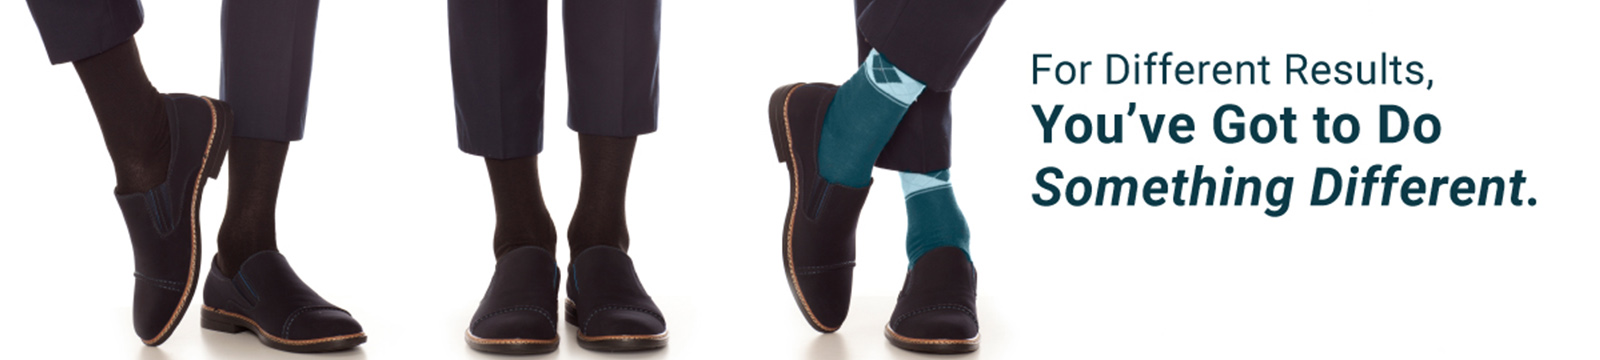 Image of three pair of legs in matching suit pants and shoes. Two pair have matching black socks, the third has aqua green colored socks on. Text overlay says for different results, you've got to do something different.